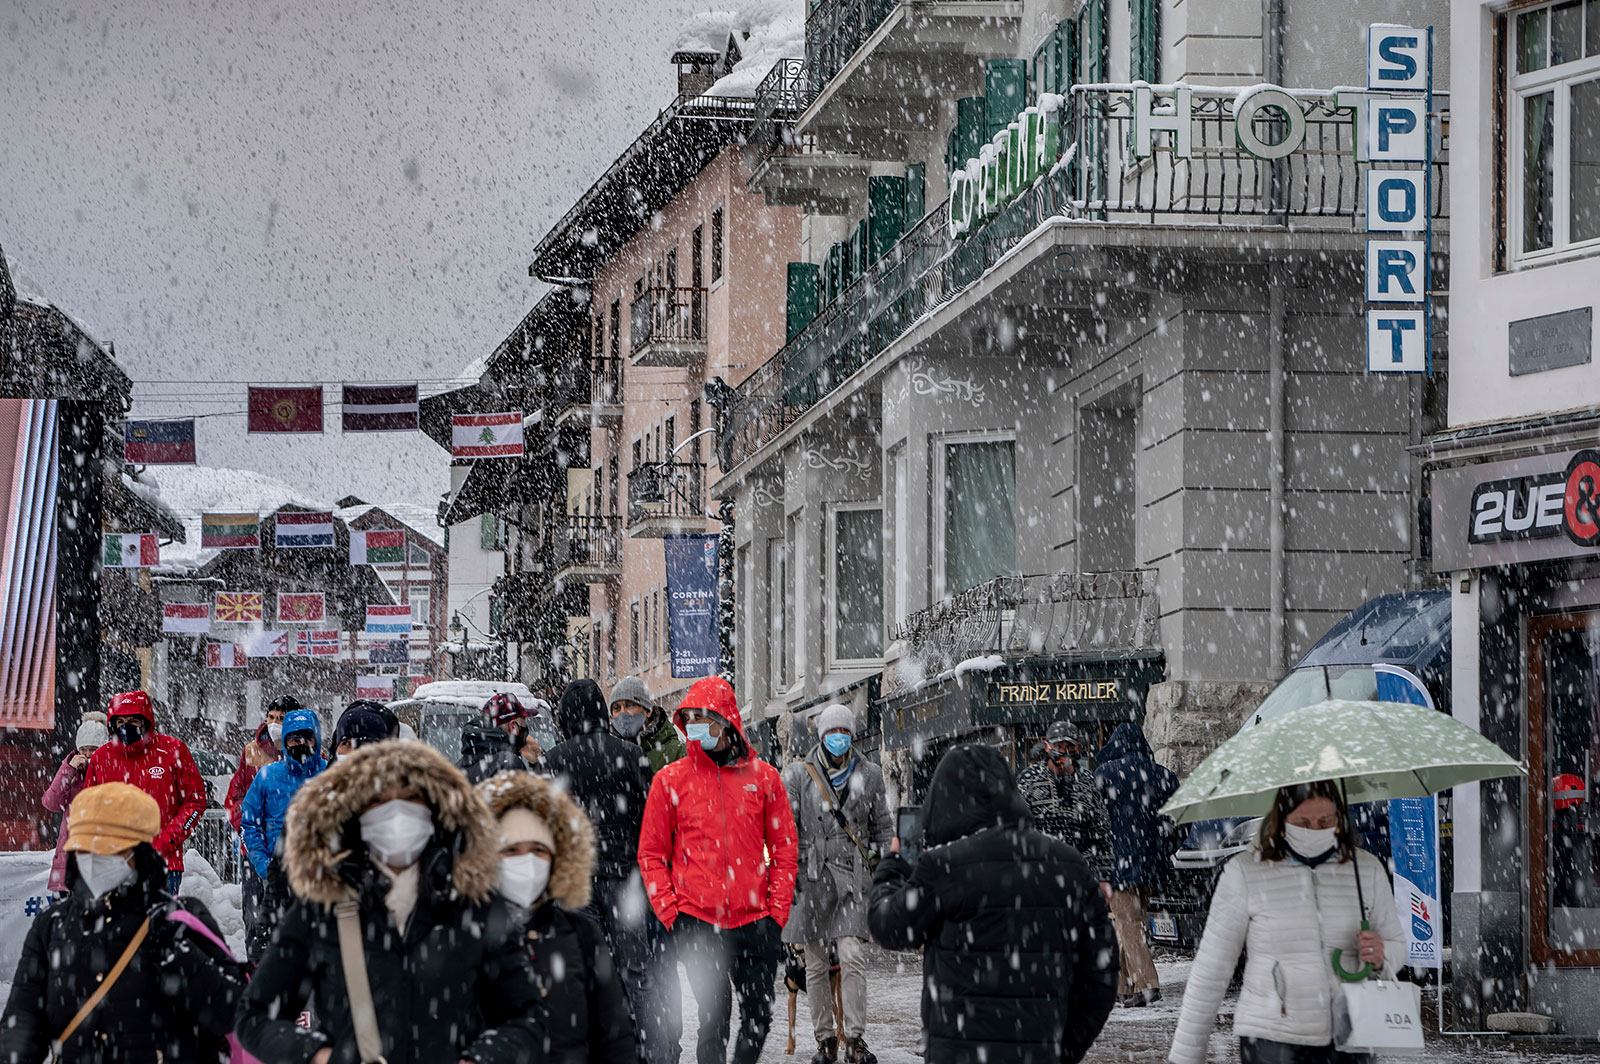 Snow falls in Cortina d'Ampezzo, Italy in February 2021.